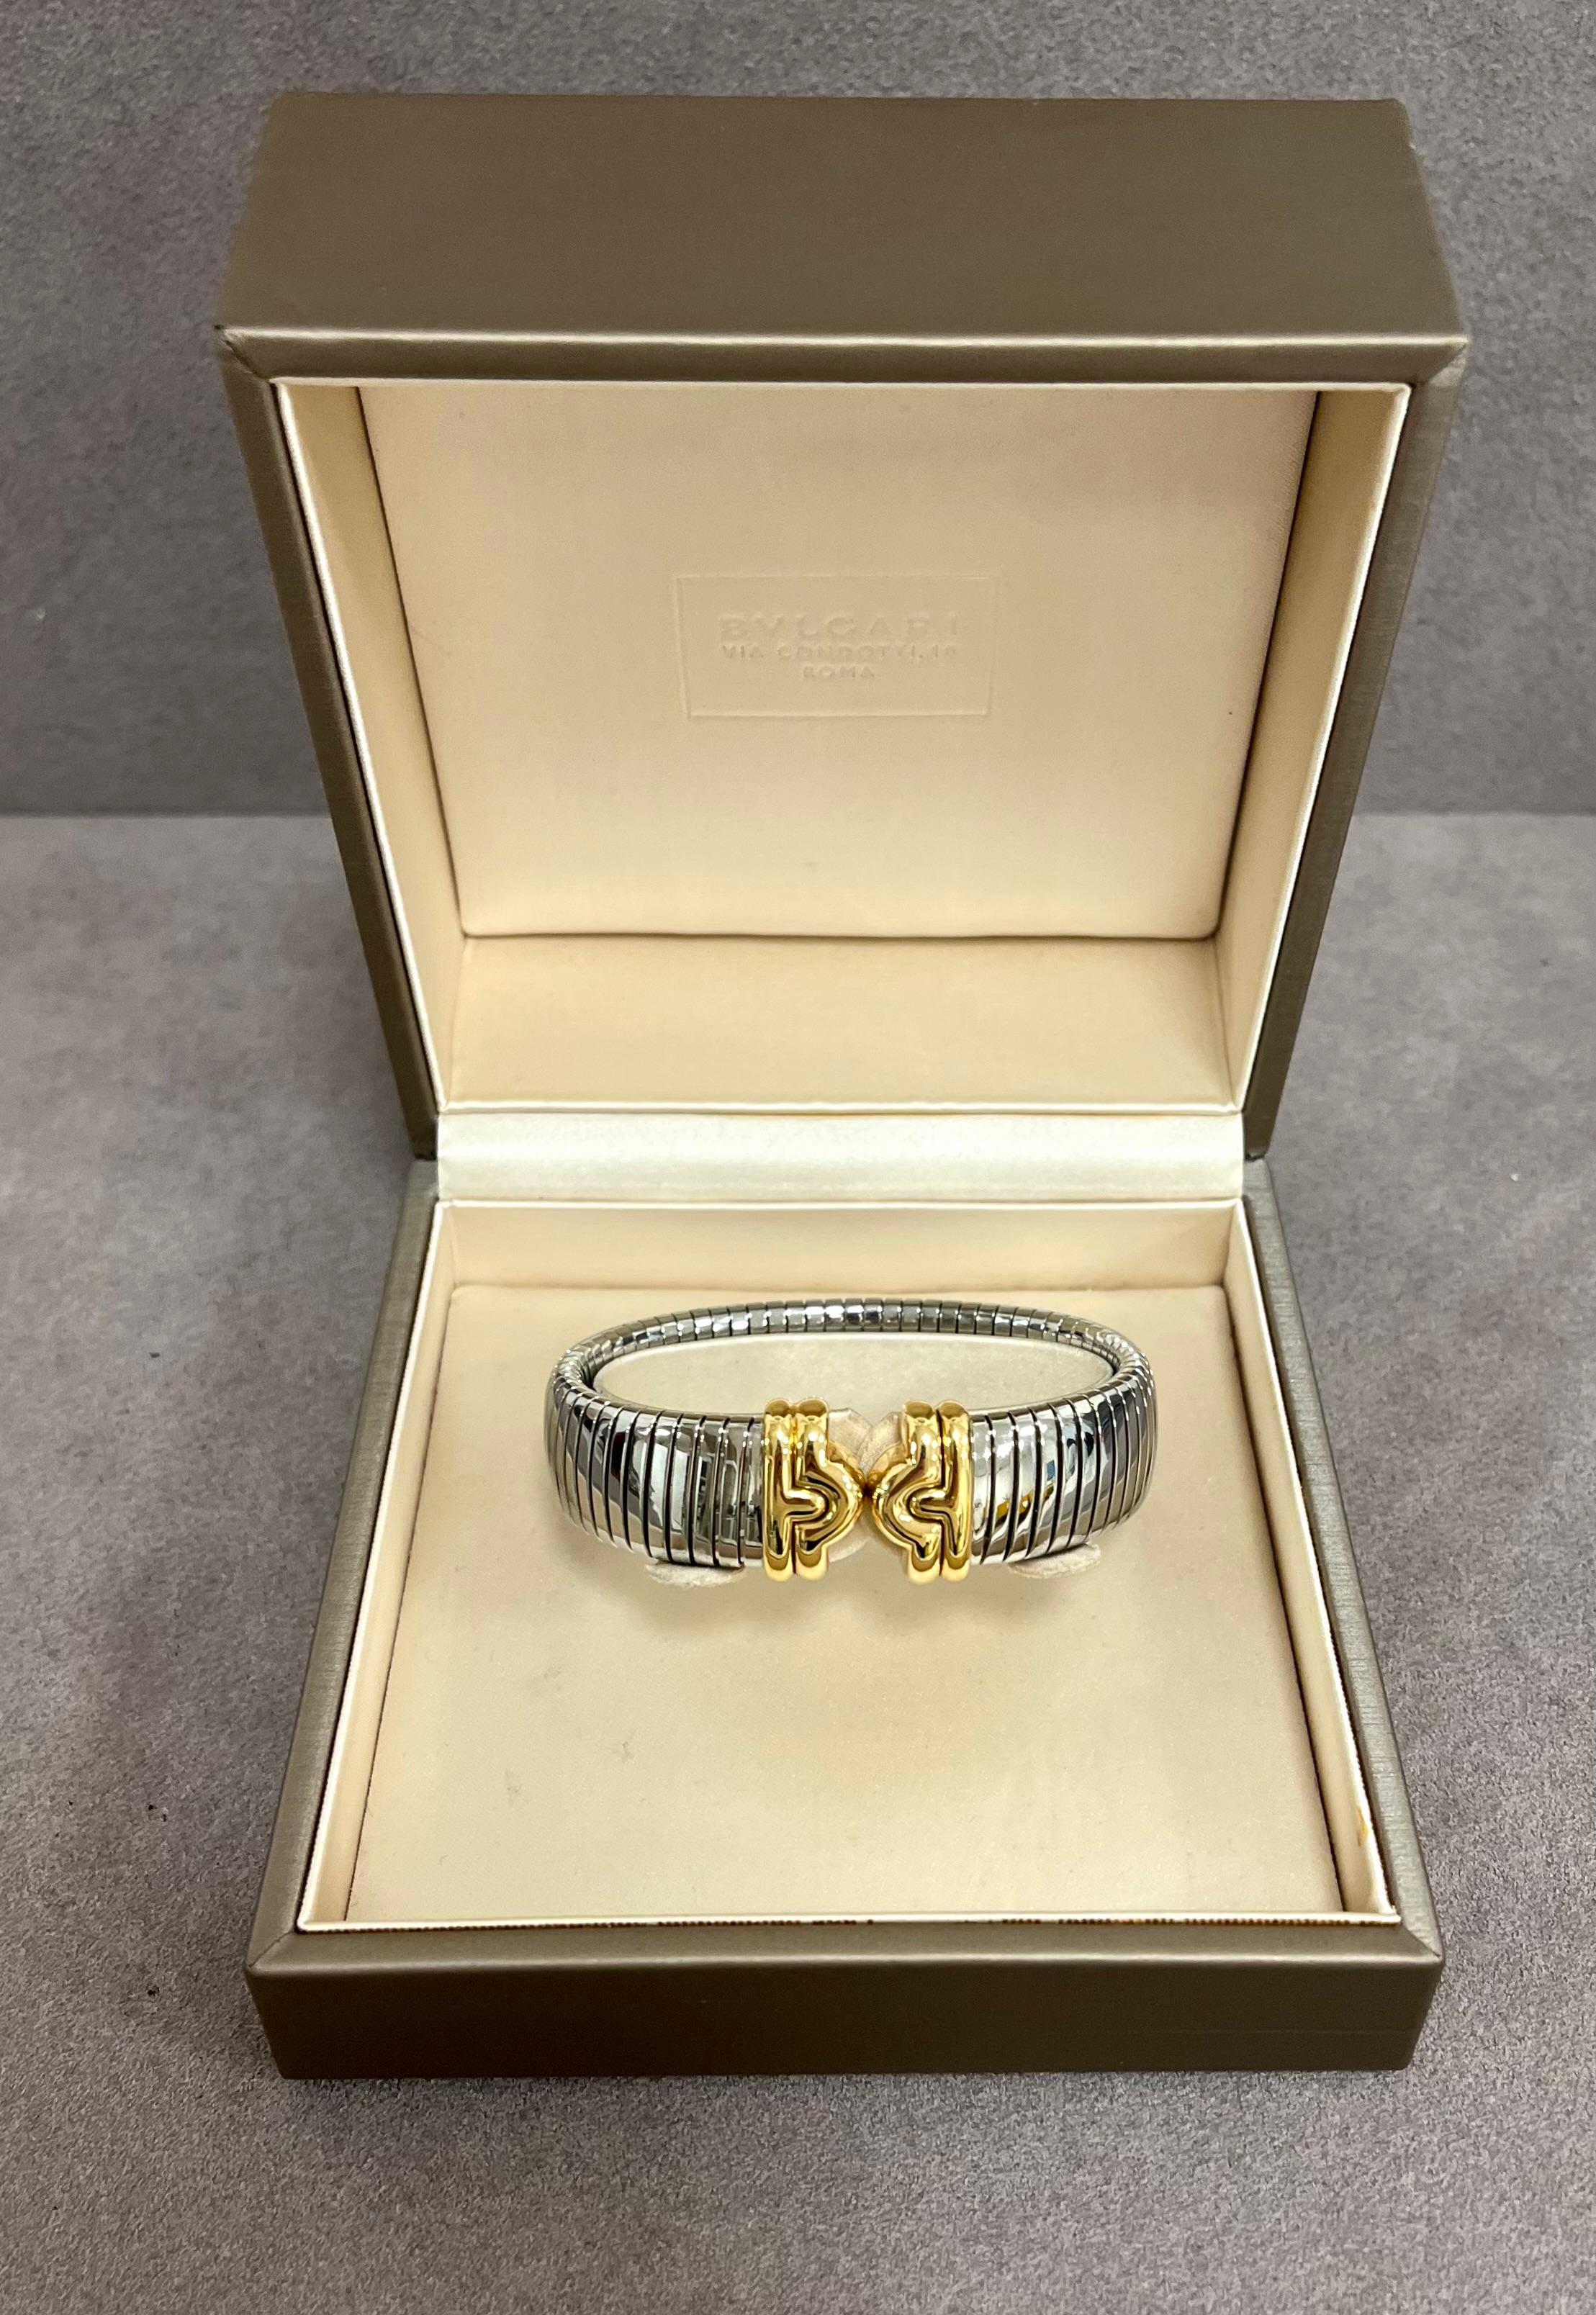 18-karat yellow gold and steel bracelet signed Bulgari.
This bracelet belongs to the iconic Parentesi Tubogas collection.
The bracelet is flexible and can be worn with any wrist size.
Original box.
1990 ca.

Weight: gr. 54.70
Inner diameter: 5.60 cm.